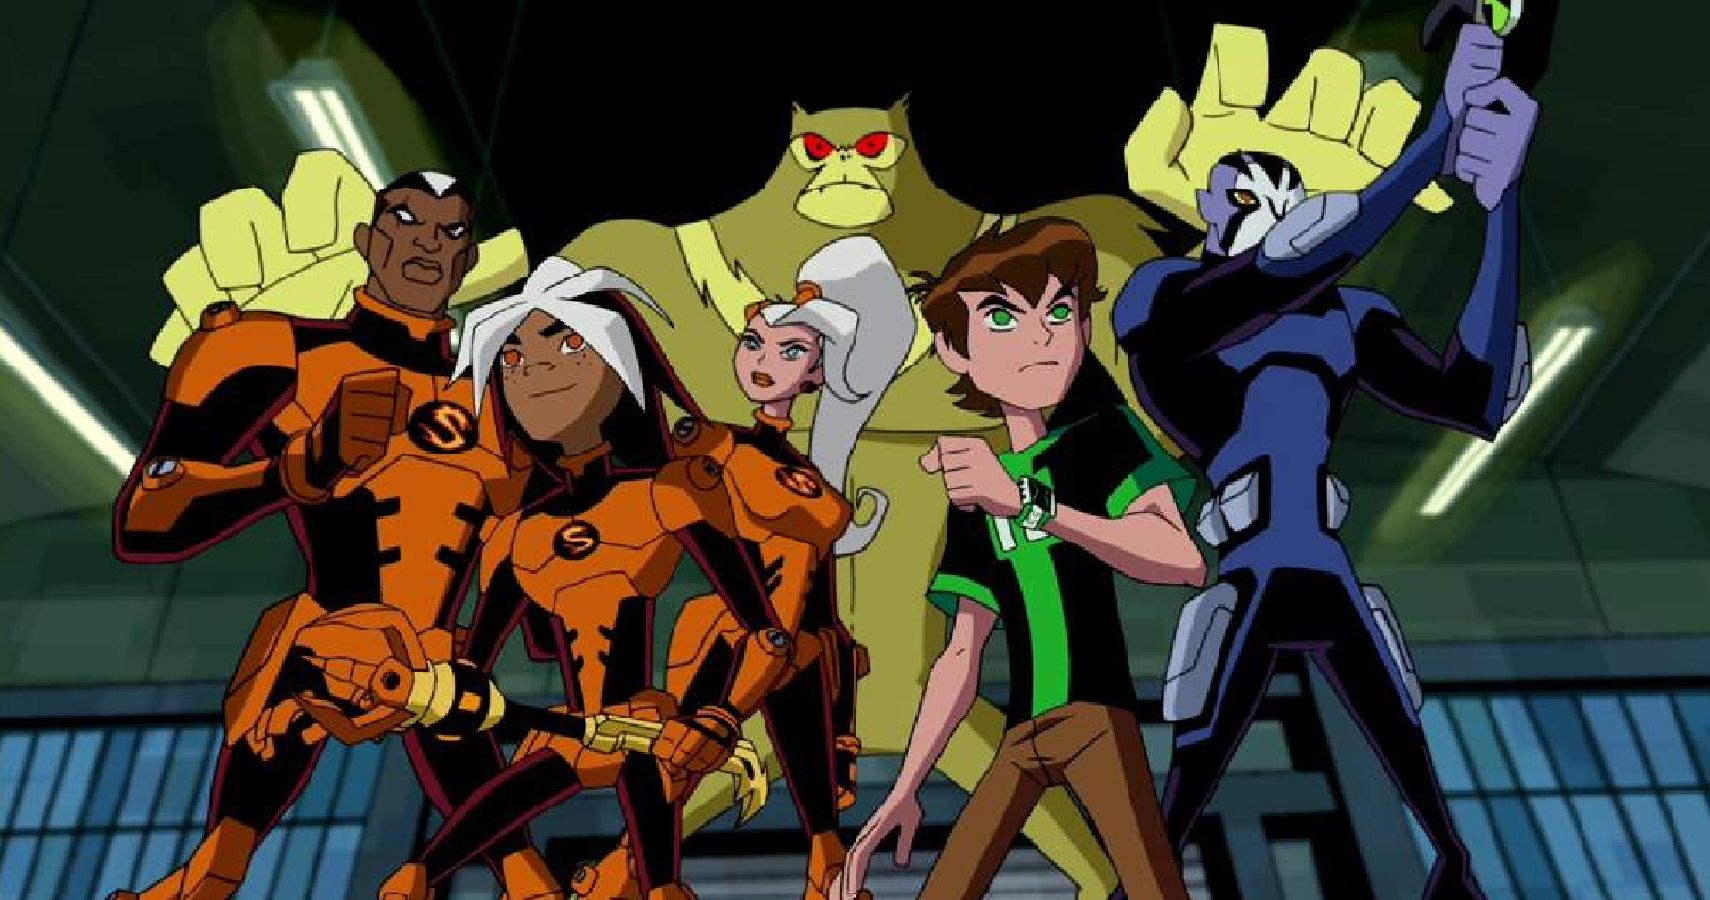 Download The 15 Best Crossovers In Cartoon History And The 15 Worst